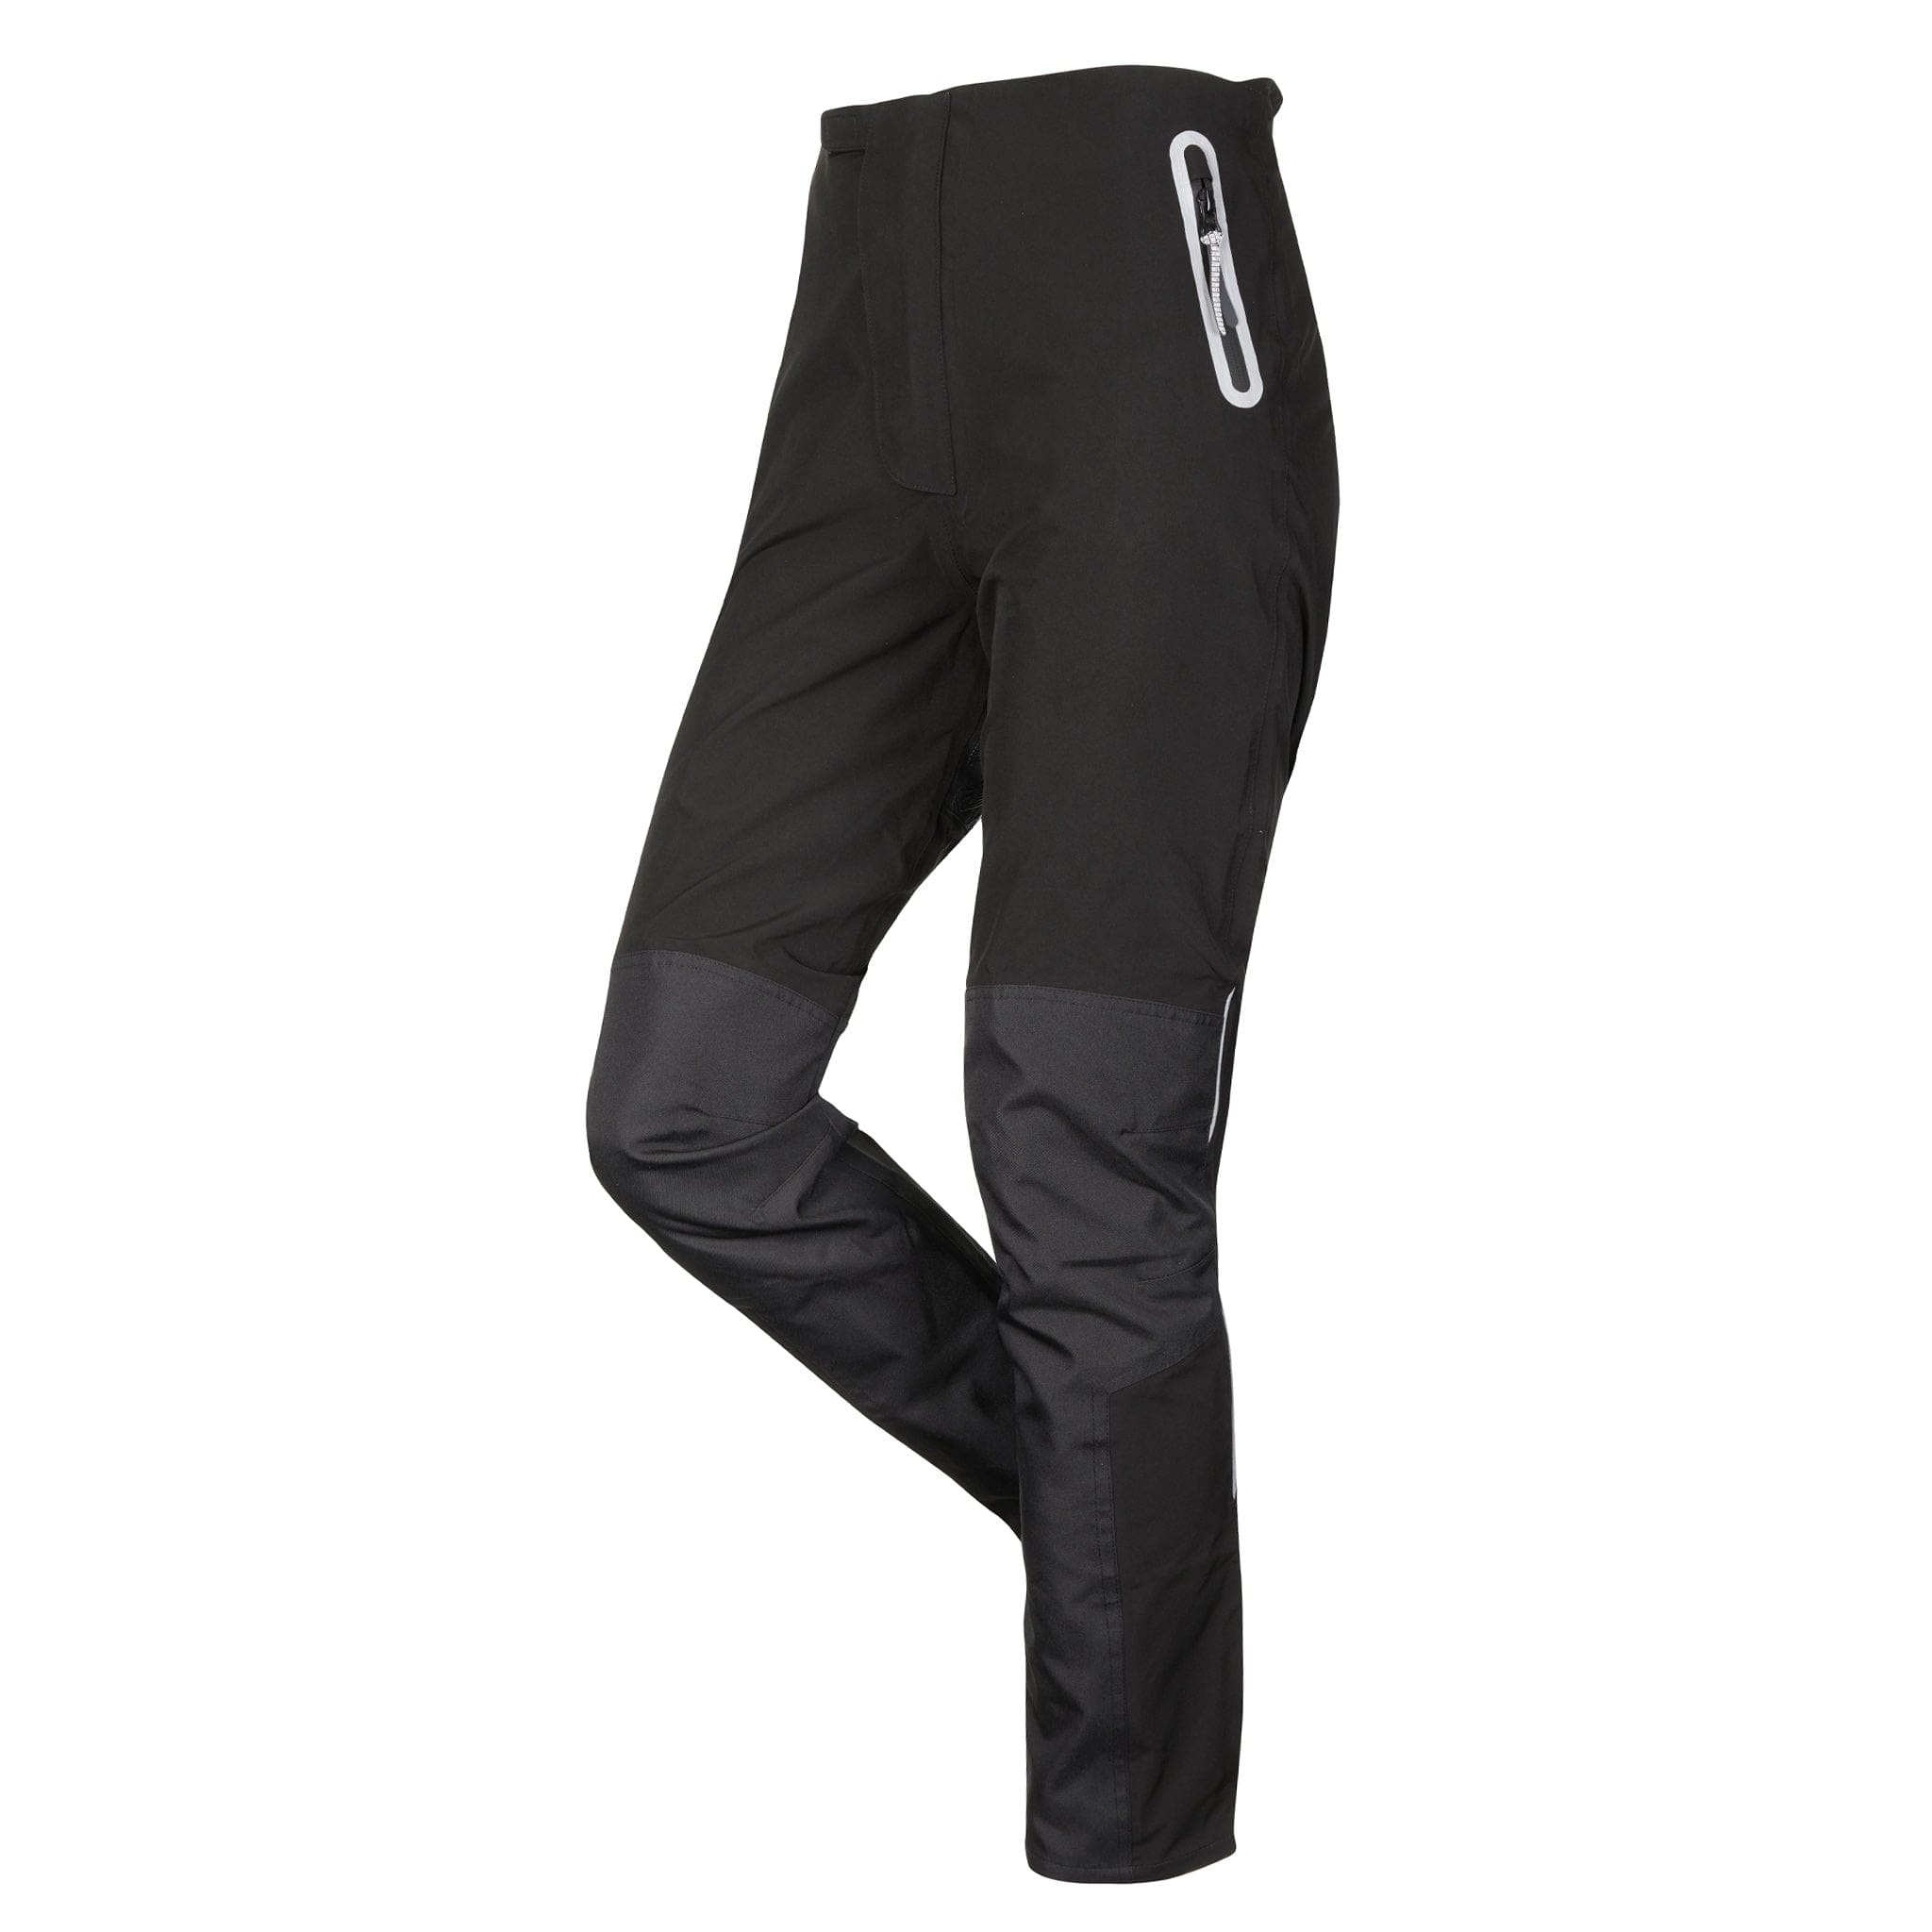 LeMieux Drytex Stormwear Waterproof Over Trousers 4759 Black Front View